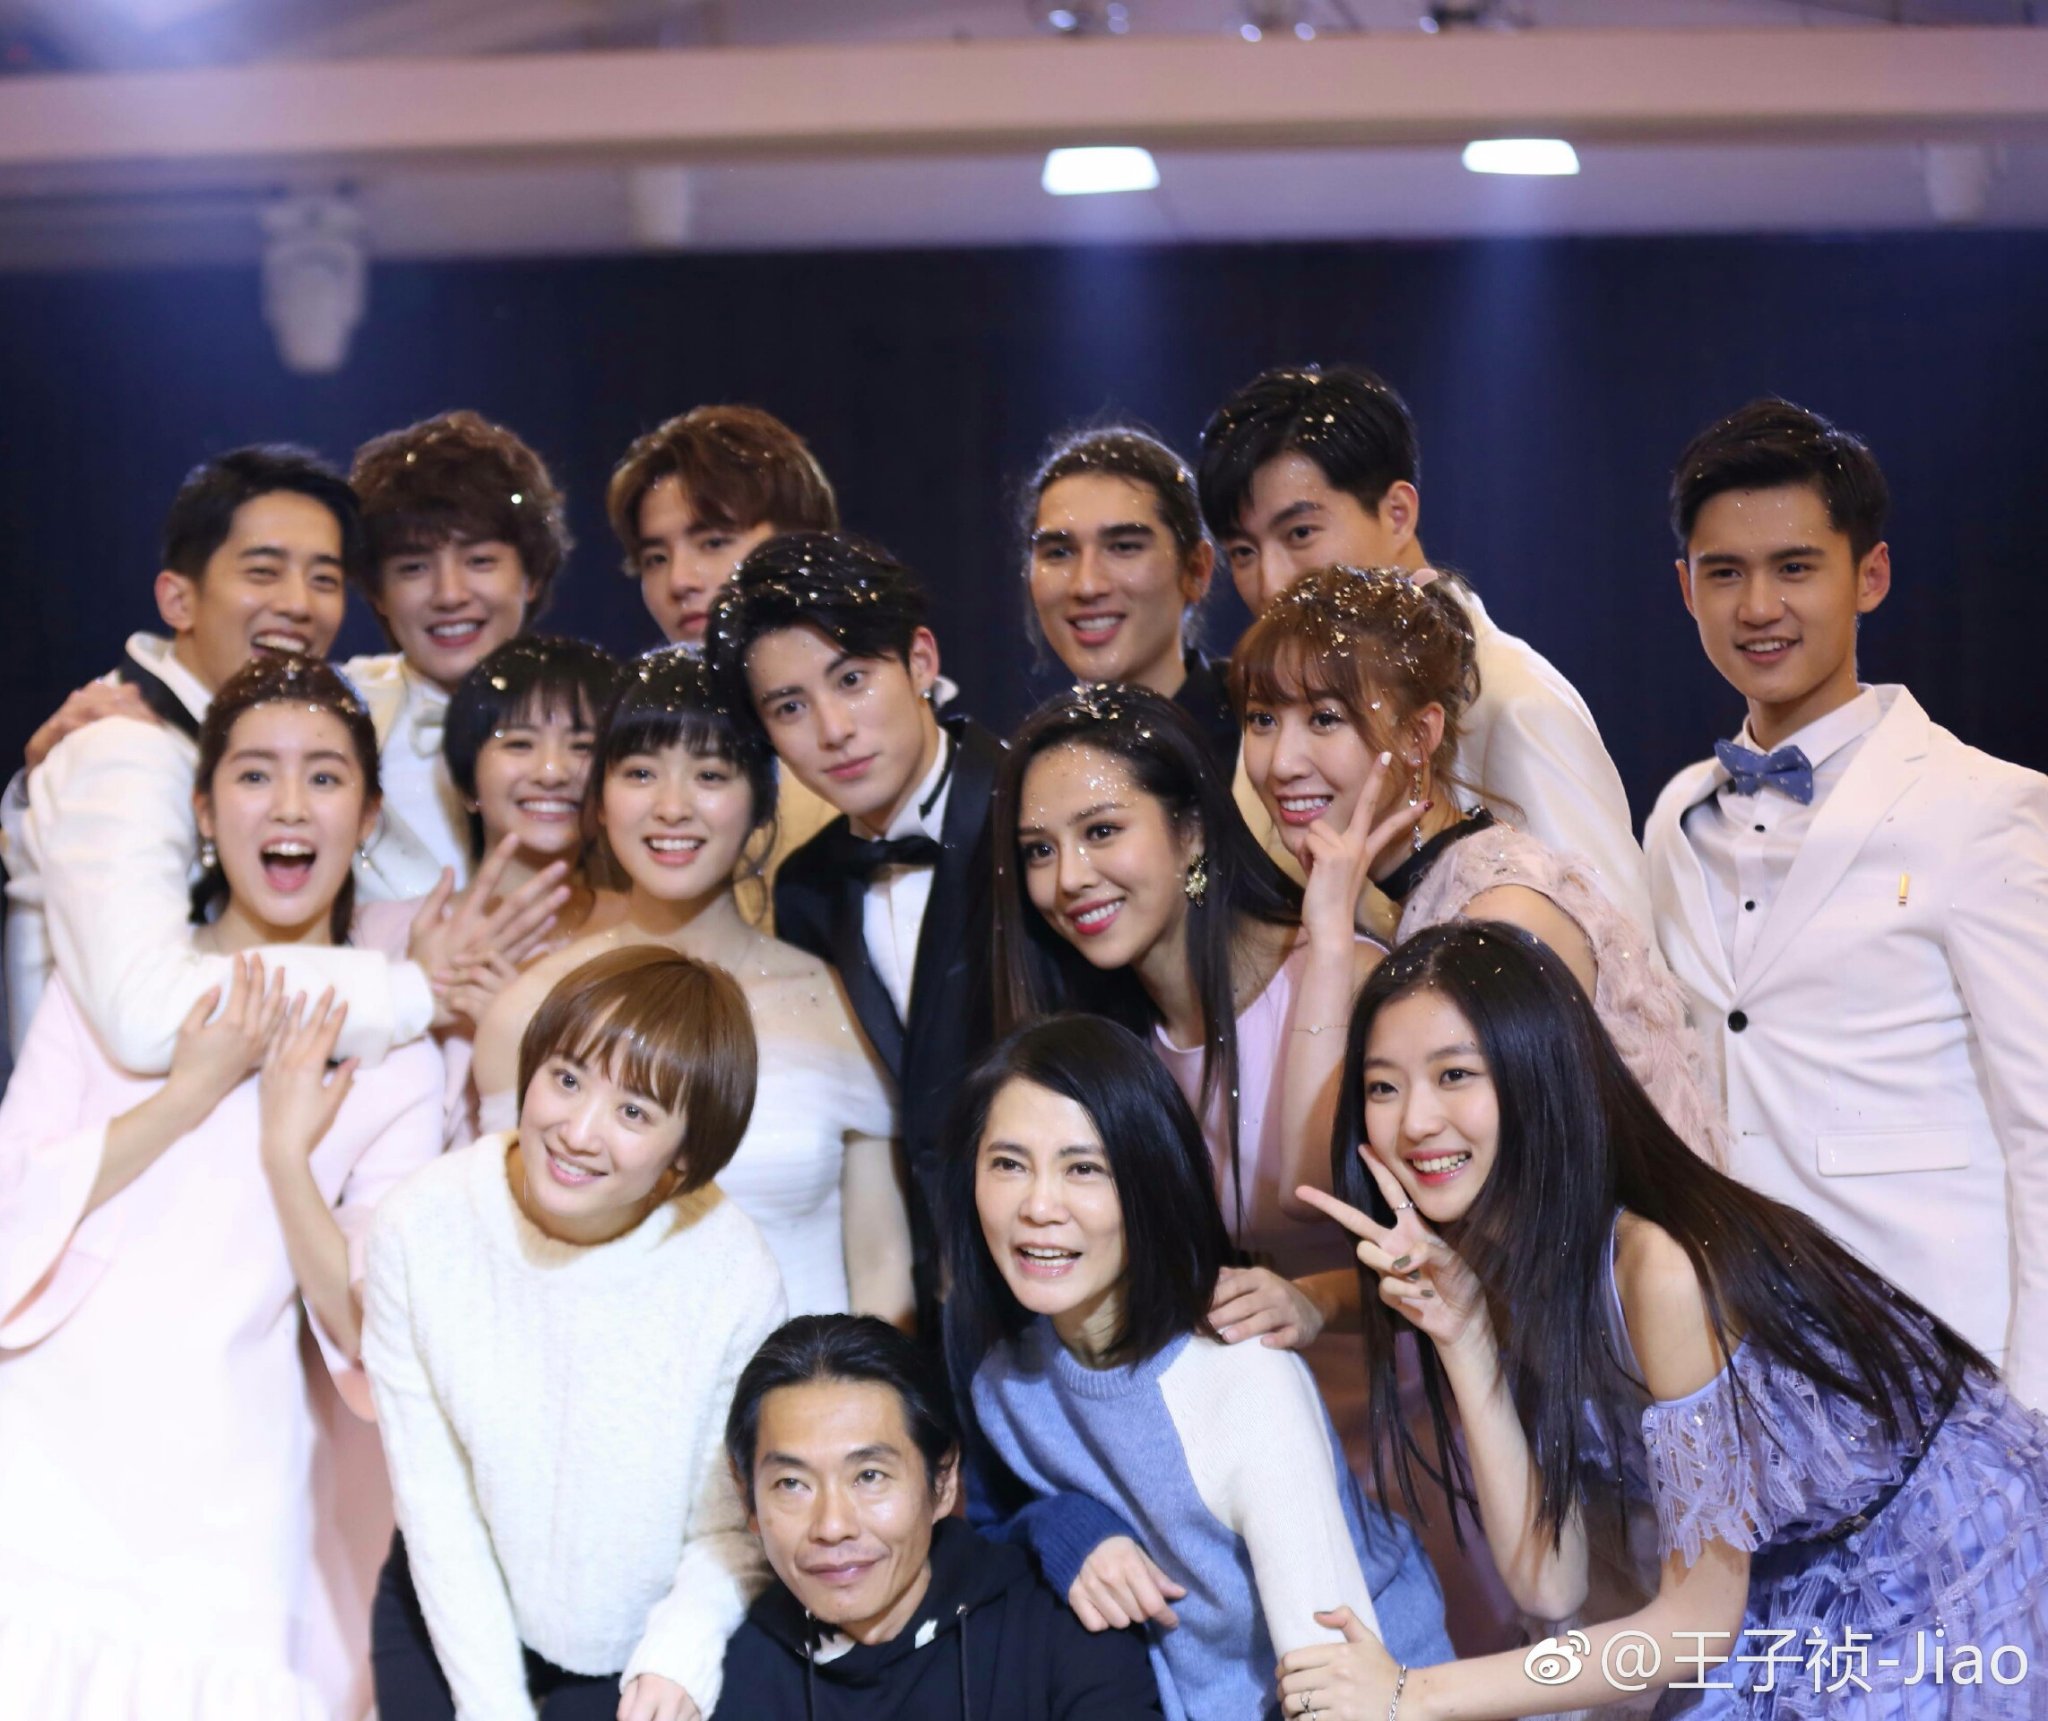 Meteor Garden Confessions On Twitter Meteor Garden 2018 Cast Will Forever Hold A Special Place In My Heart